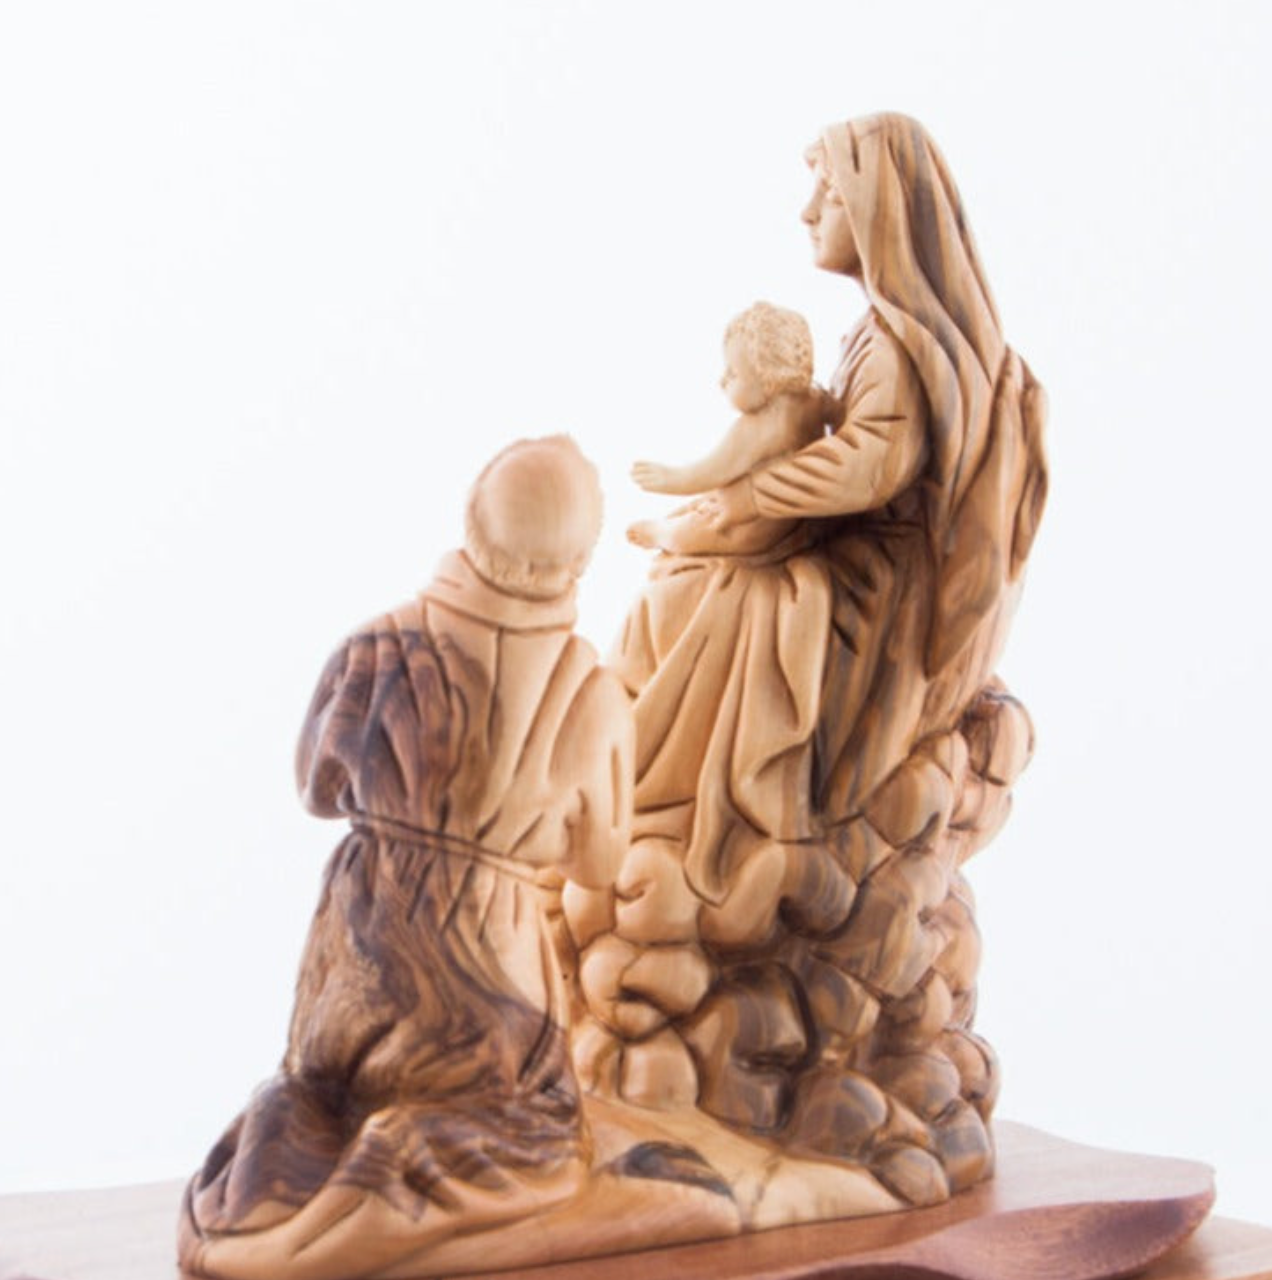 Queen of the Franciscan Order Virgin Mary Holding Baby Jesus Christ with St. Francis Kneeling Carved Art Sculpture in Olive Wood Statue from Holy Land